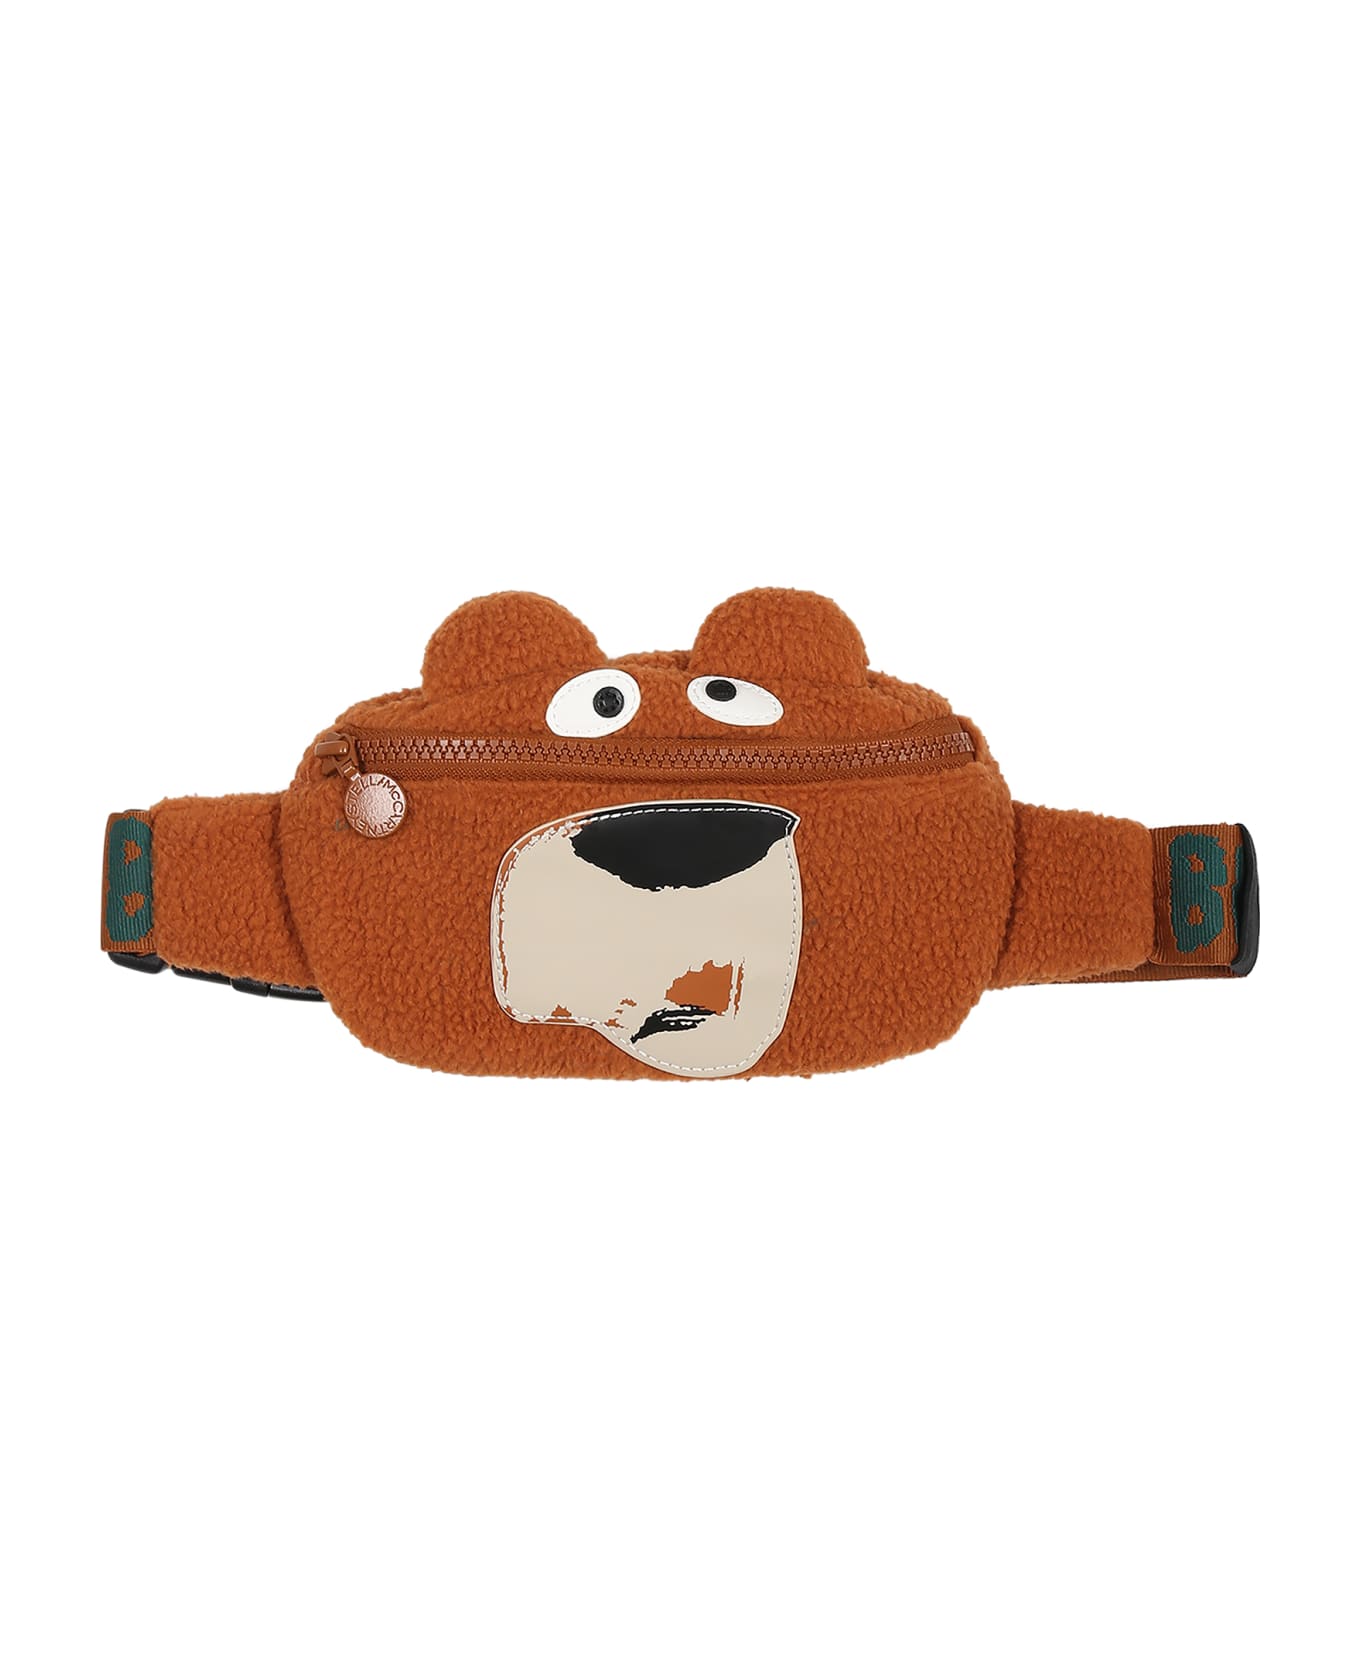 Stella McCartney Kids Brown Fanny Pack For Boy With Bear - Brown